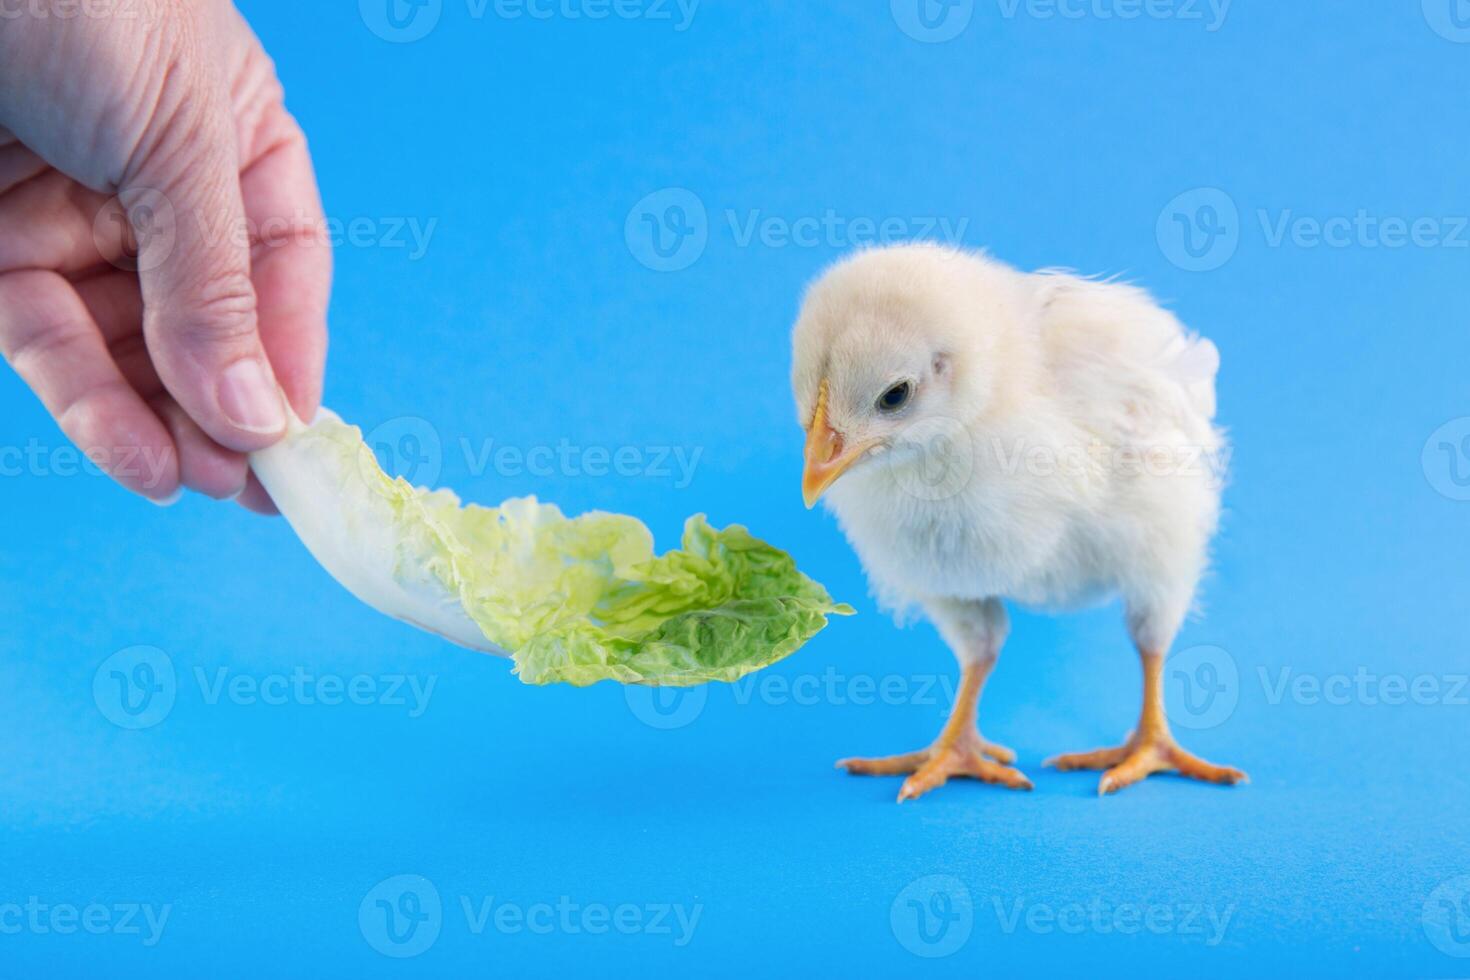 Chicken and lettuce on a blue background. Chick hatched from an egg. photo